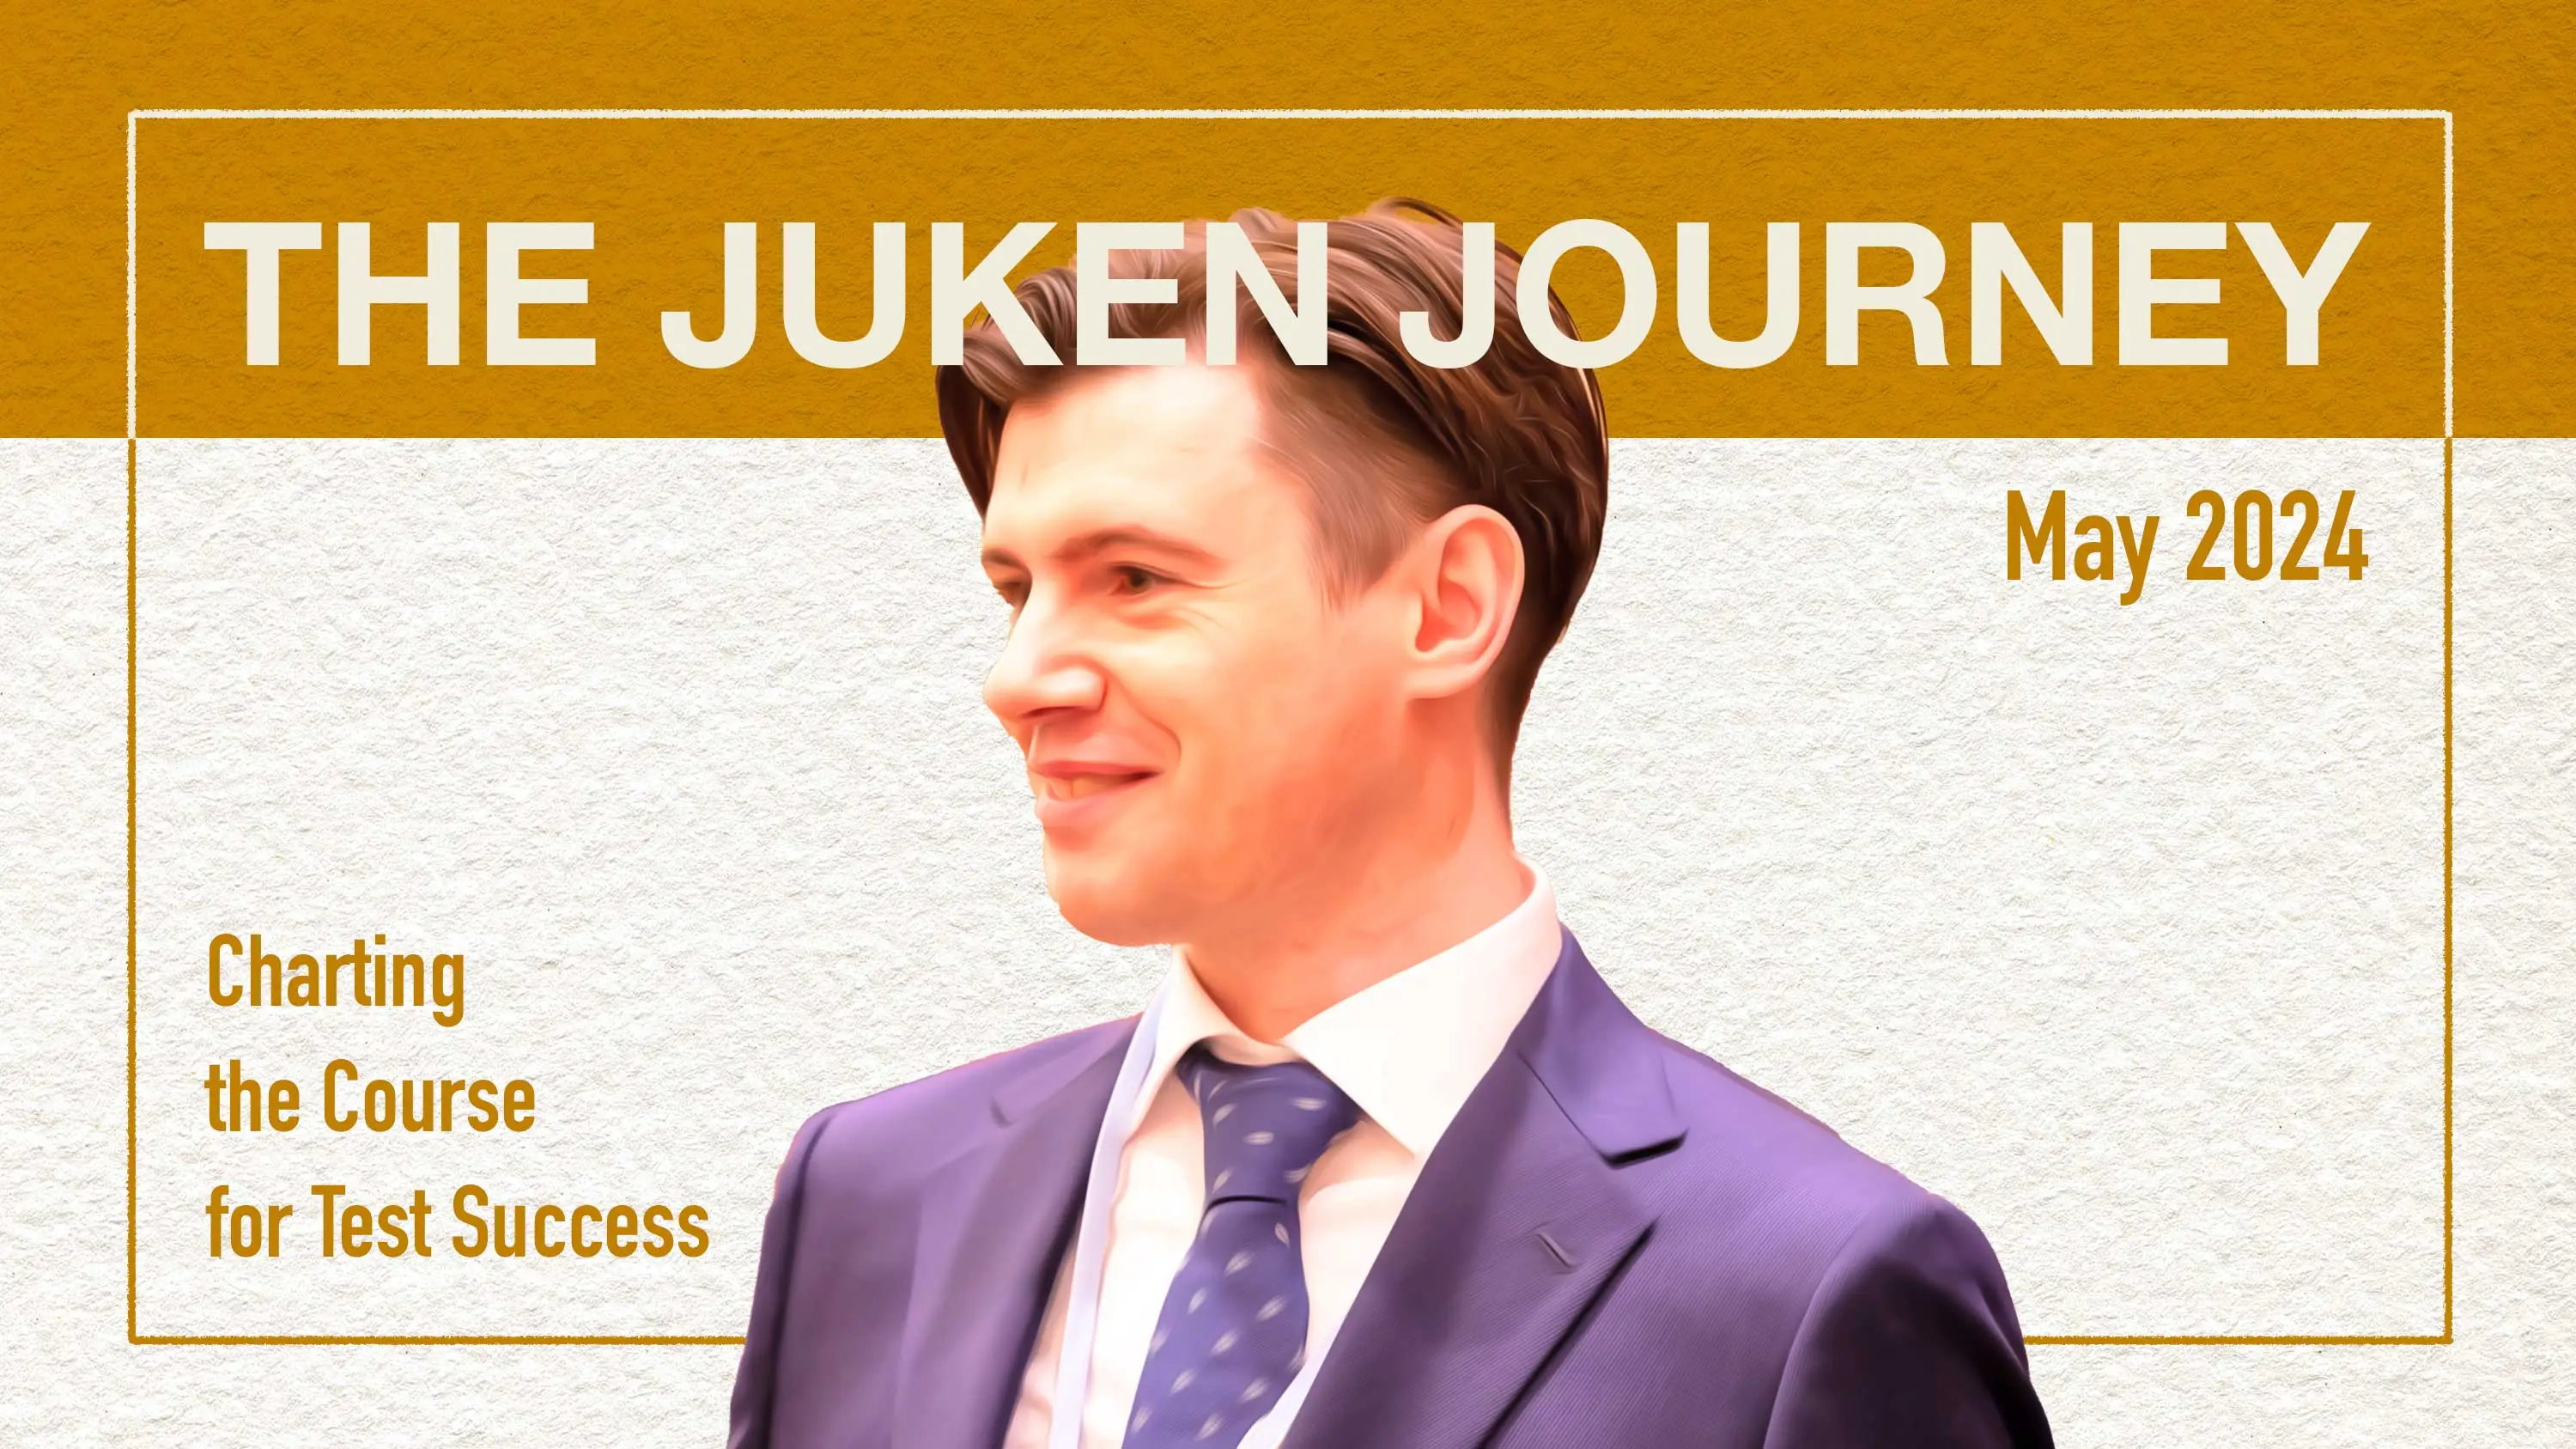 The Juken Journey: Charting the Course for Test Success - May 2024